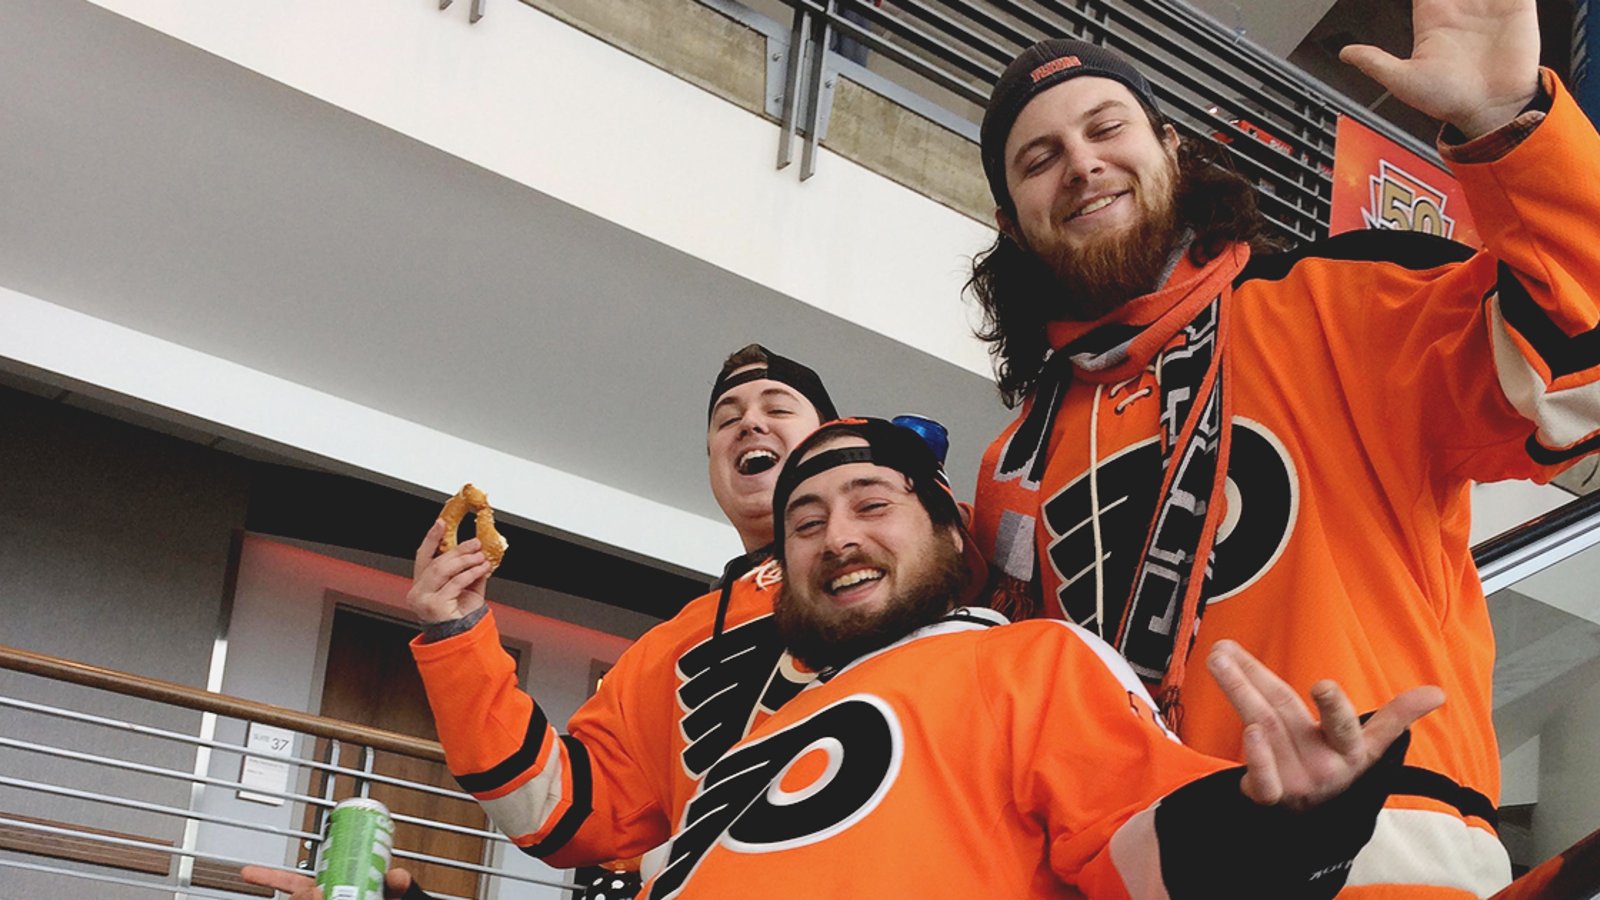 Must Read: Two people reportedly looking to find Flyers fans.